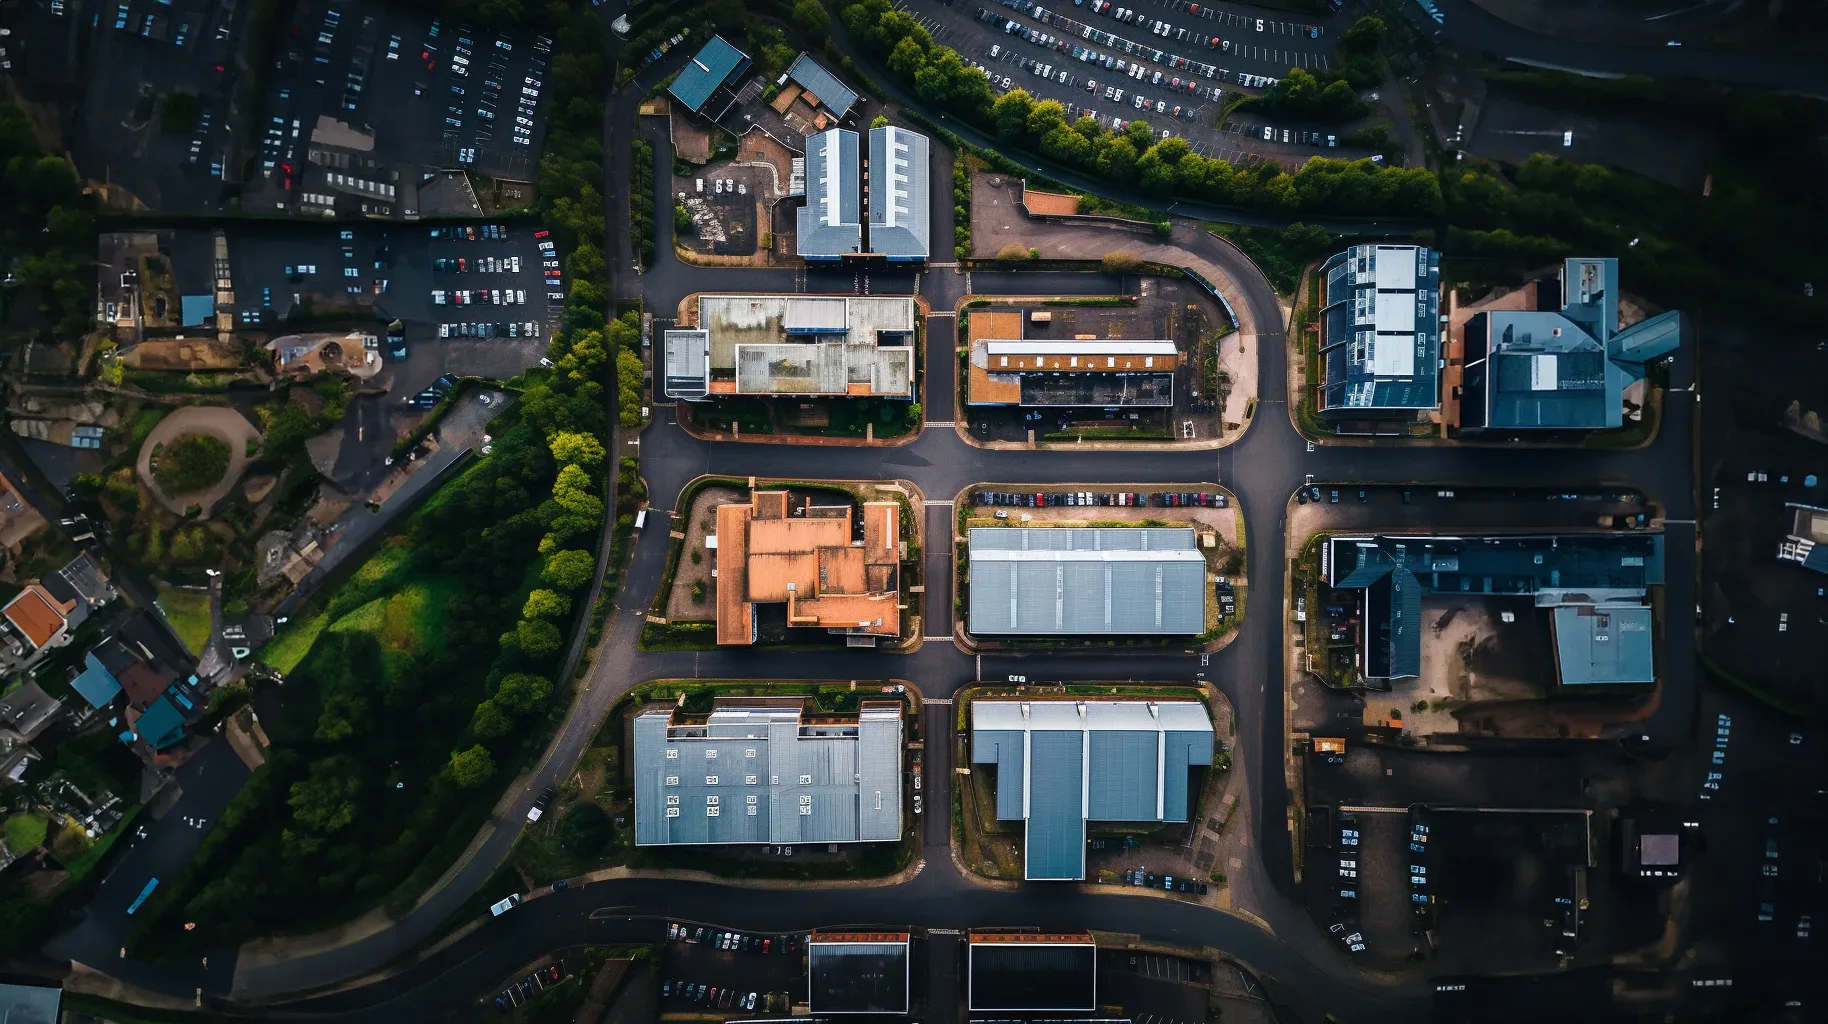 An aerial view of a city with buildings and trees. Frome SEO Services